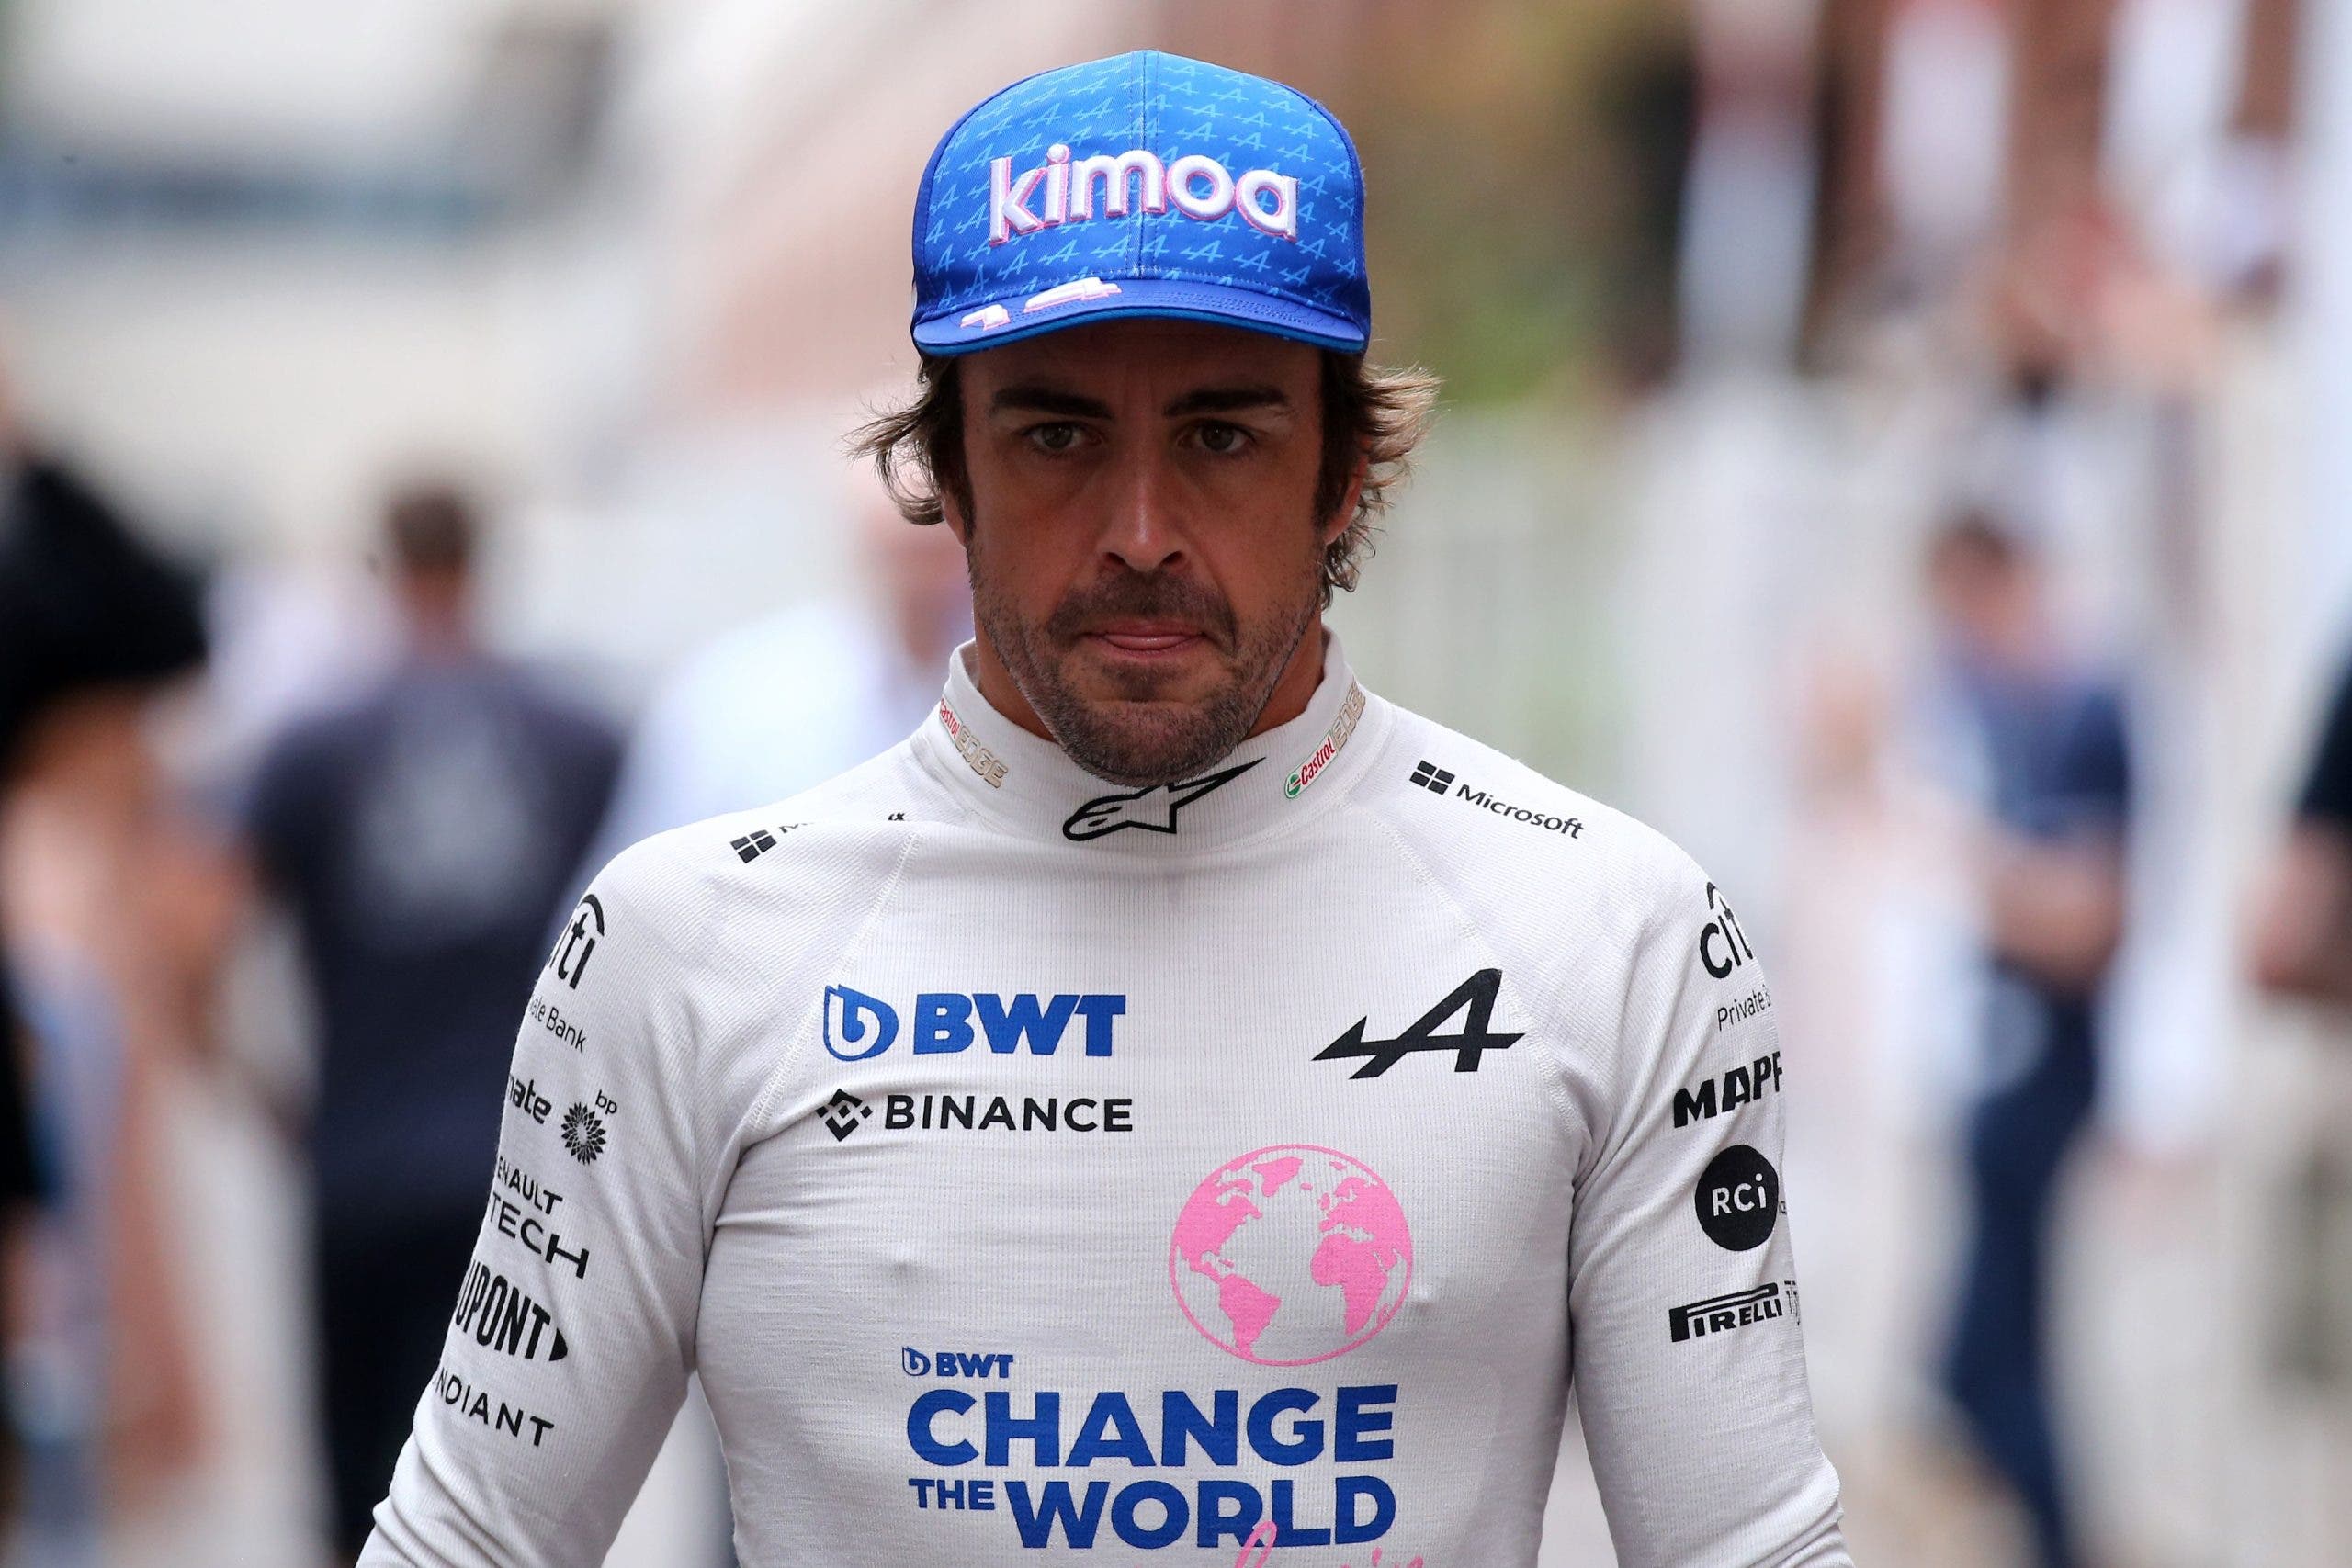 Legend of F1 speaks without filters of Fernando Alonso and his signing by Mercedes
